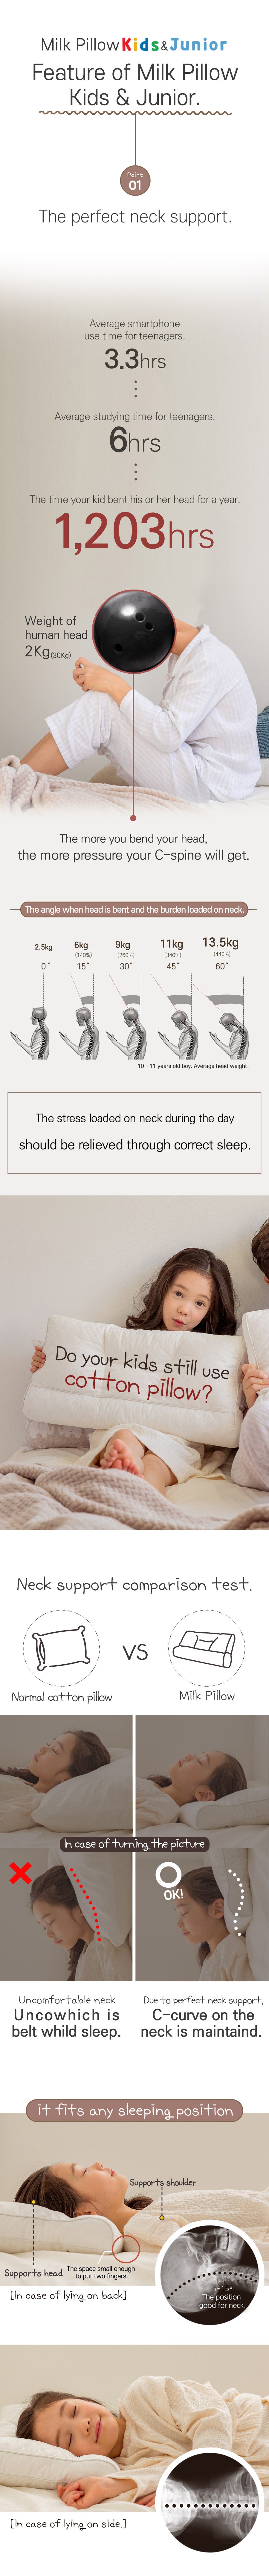 Feature of Milk Pillow Kids & Junior - 1. The perfect neck support